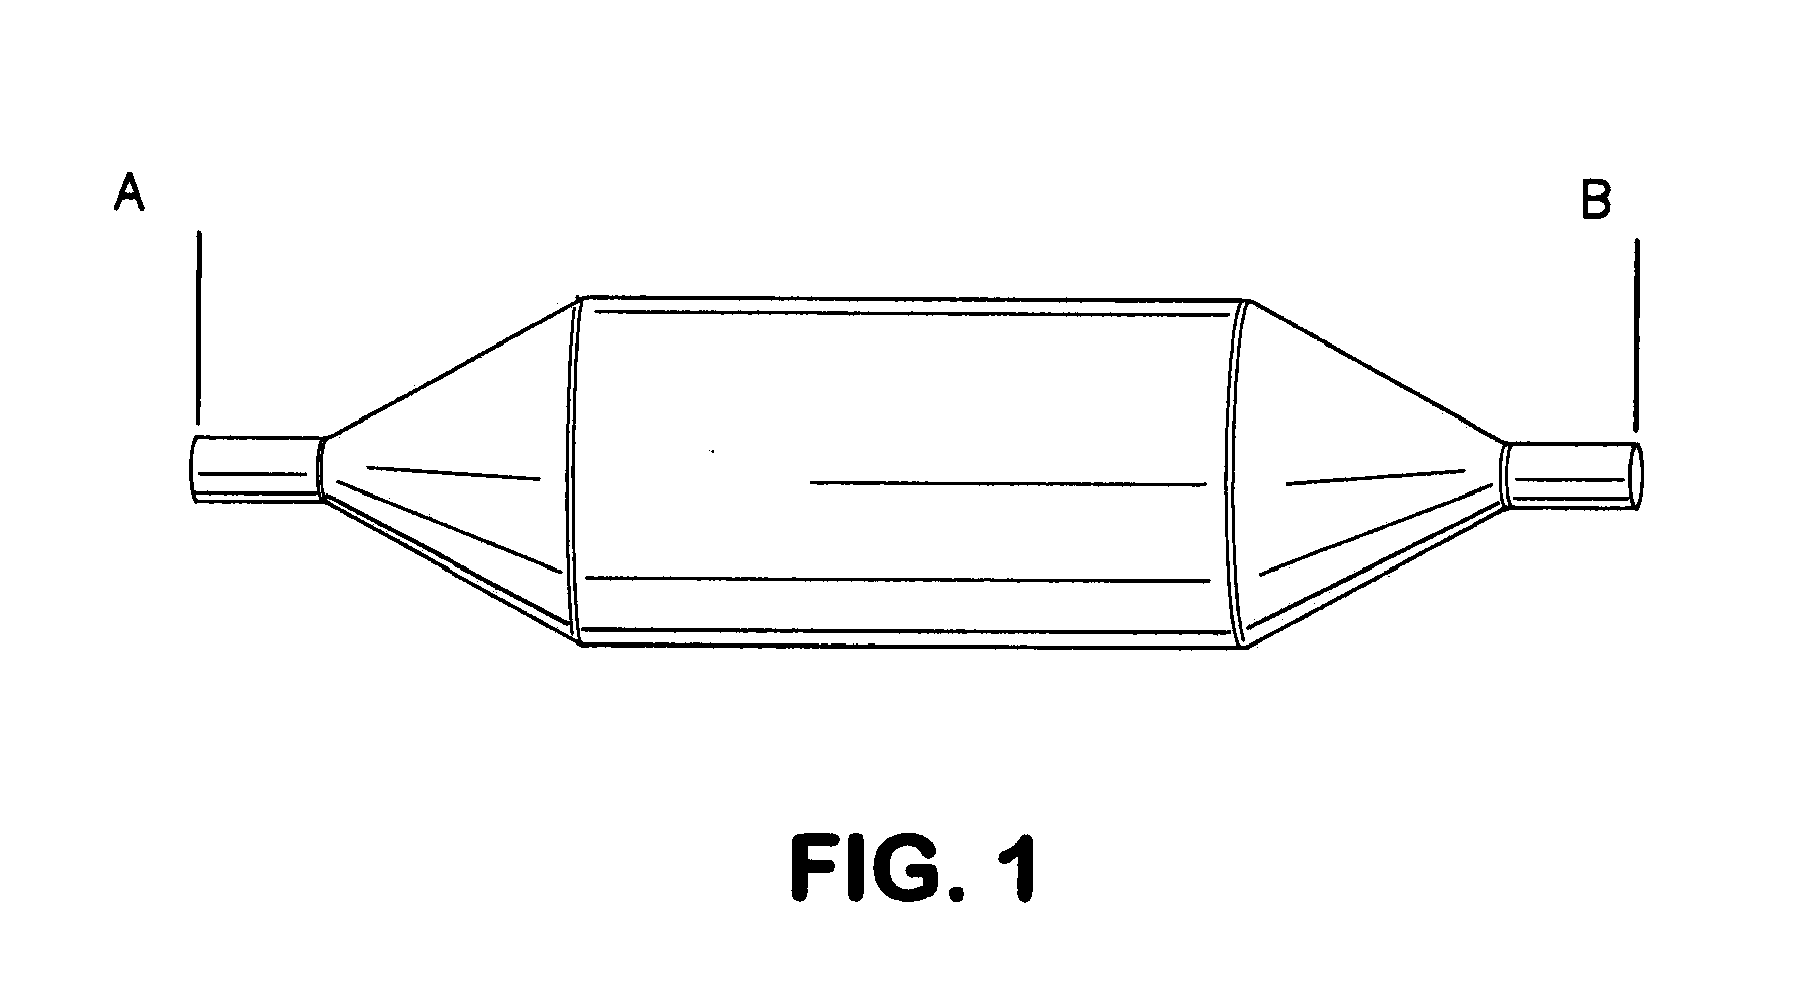 Rupture-resistant compliant radiopaque catheter balloon and methods for use of same in an intravascular surgical procedure